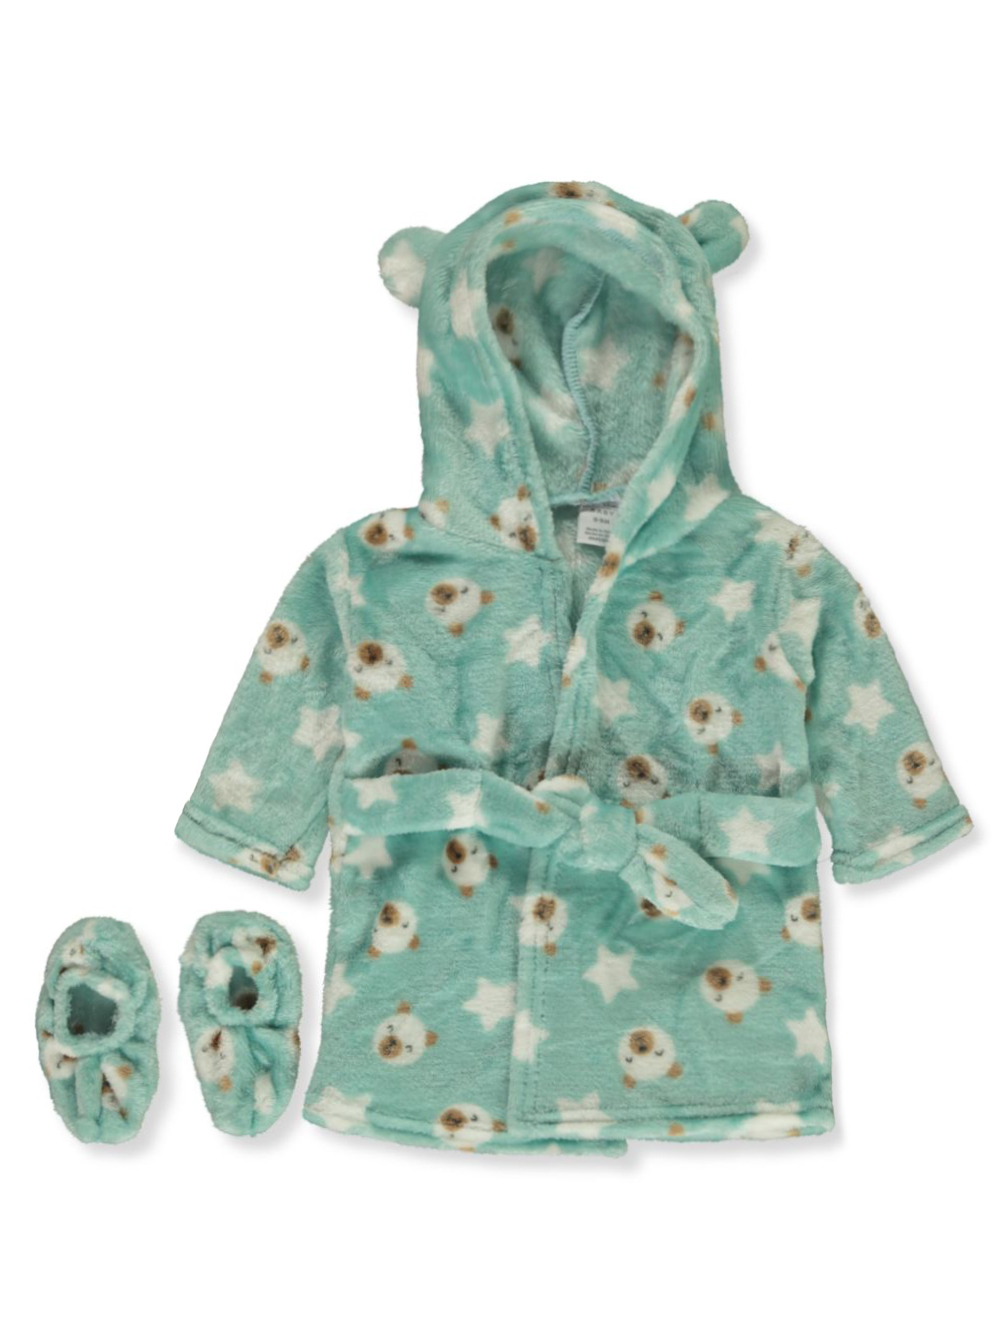 Mon Baby Baby 2-Piece Bears With Slippers